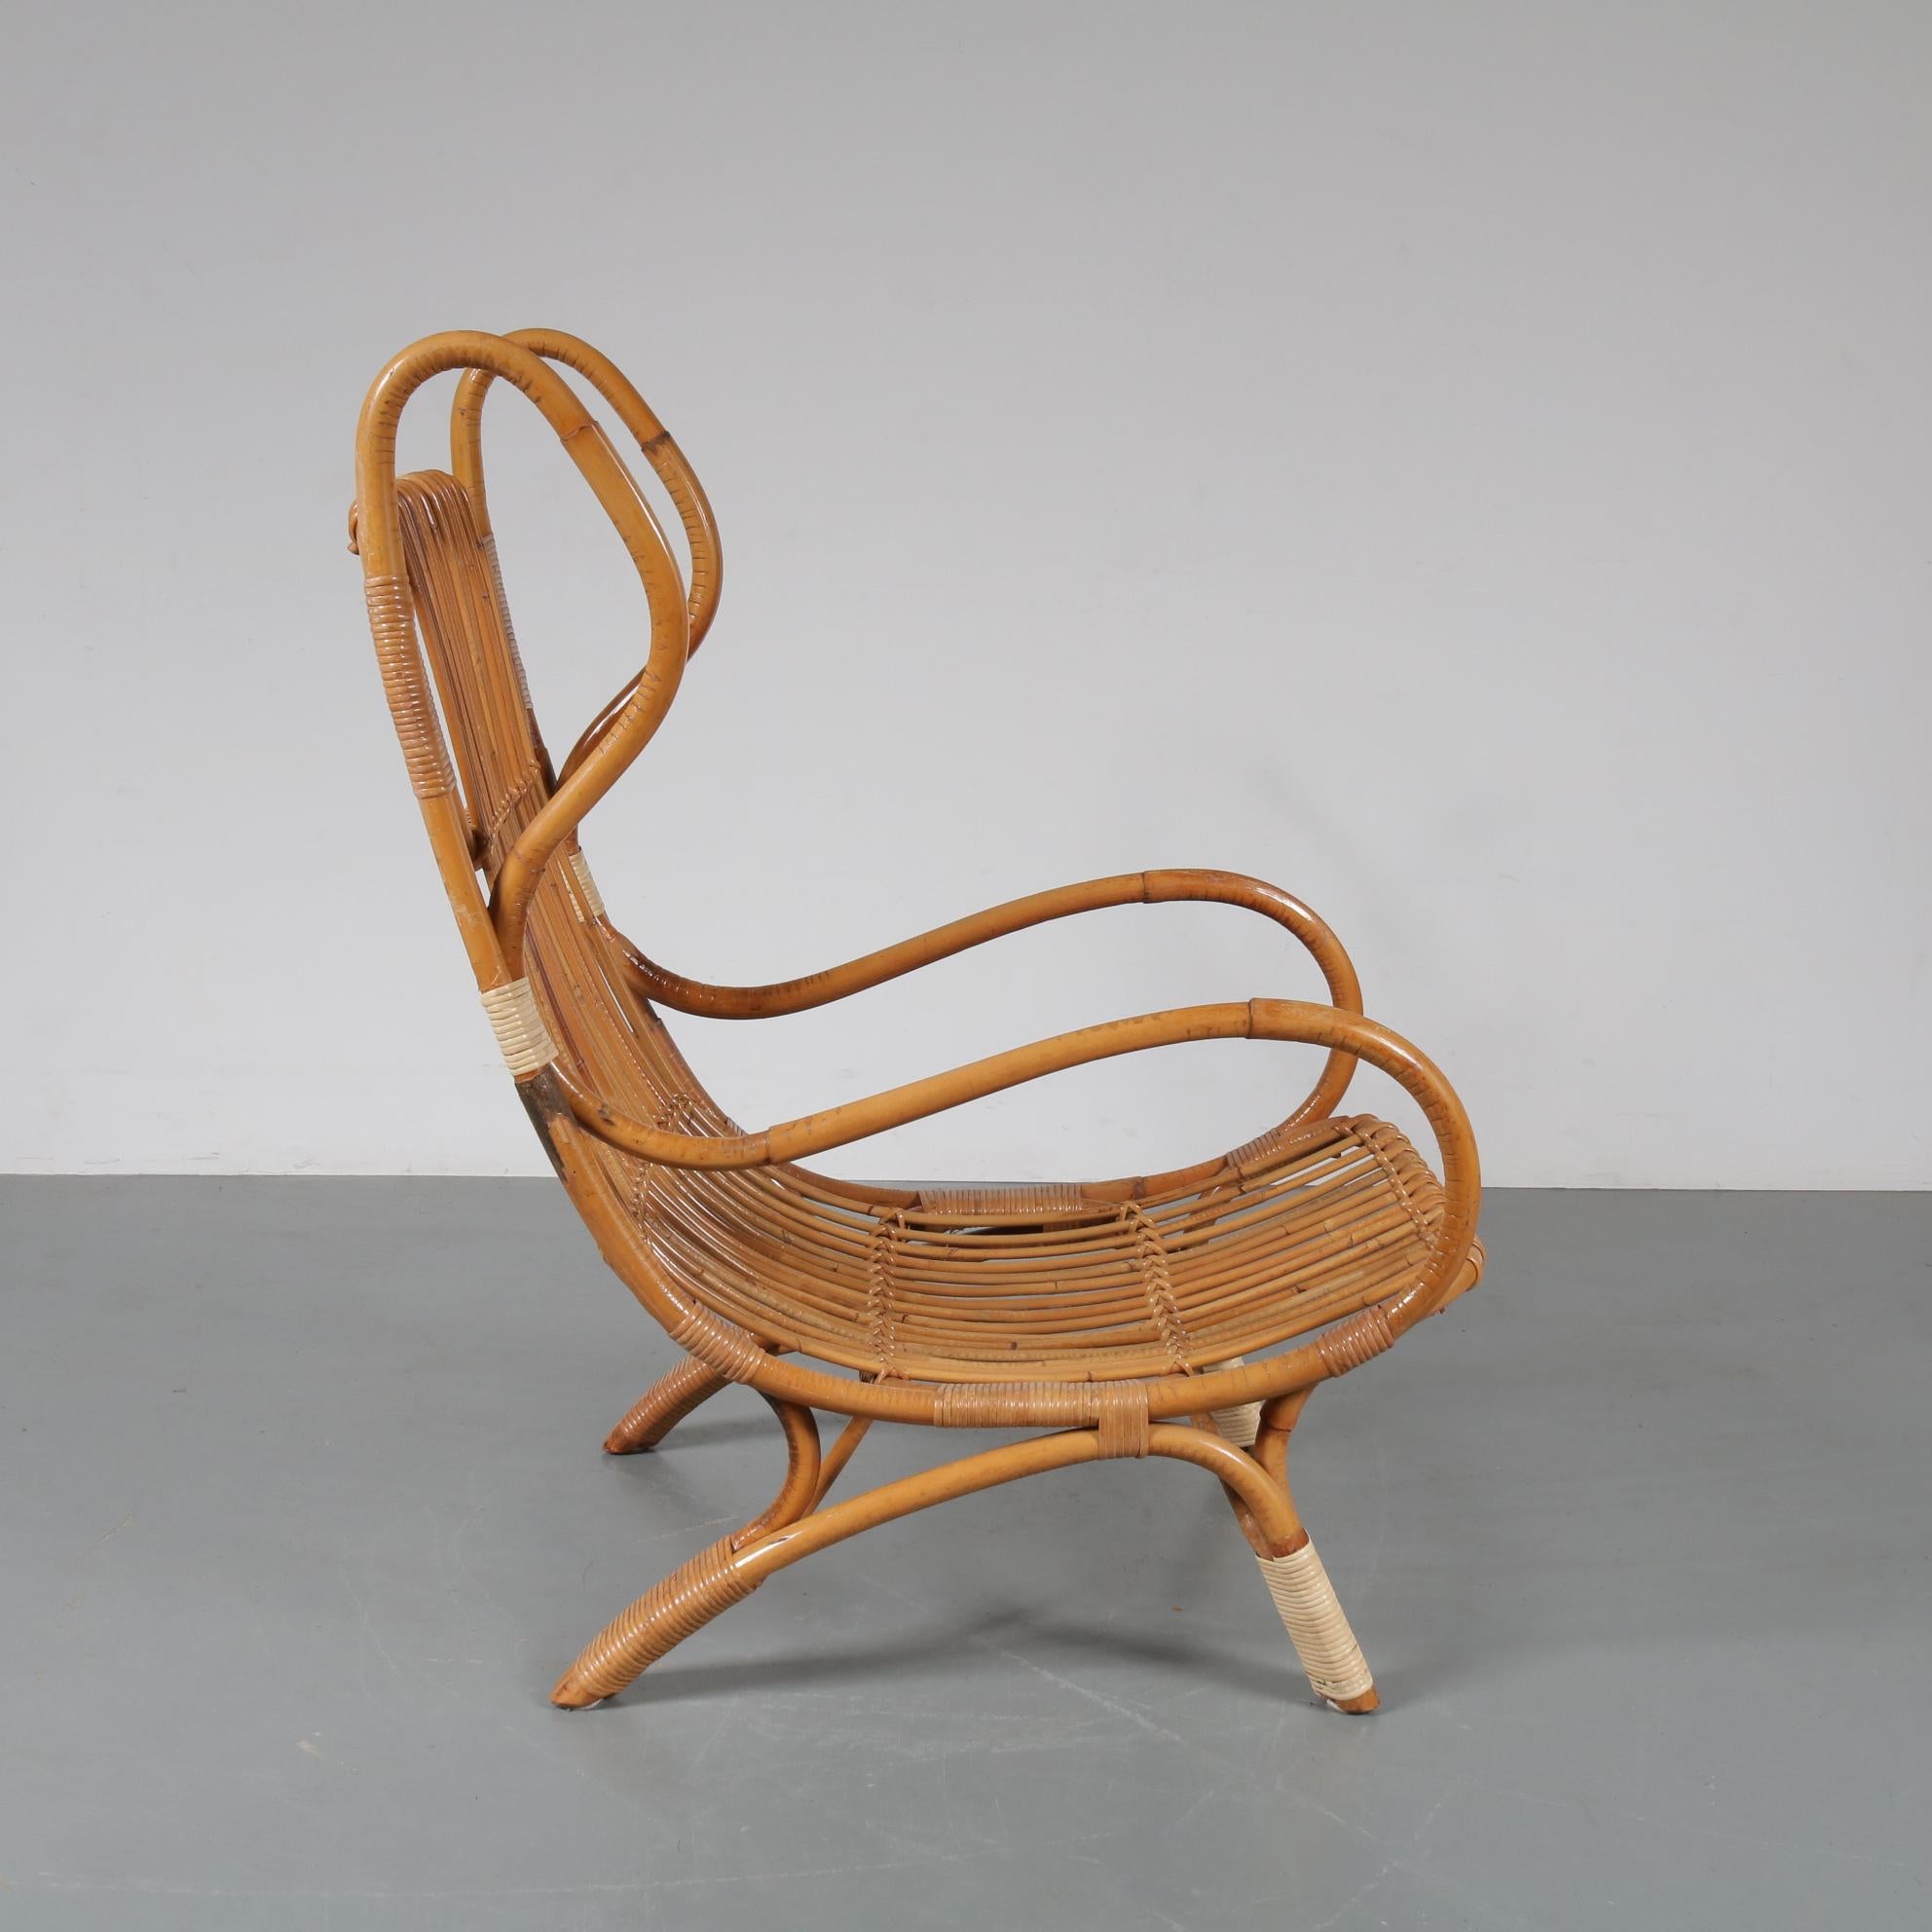 This elegant lounge chair, named Continuum model BP16, was designed by Gio Ponti and manufactured by Bonacina in Italy, circa 1950.

This iconic piece of Italian design is very well crafted of high quality rattan, nicely shaped in different curves